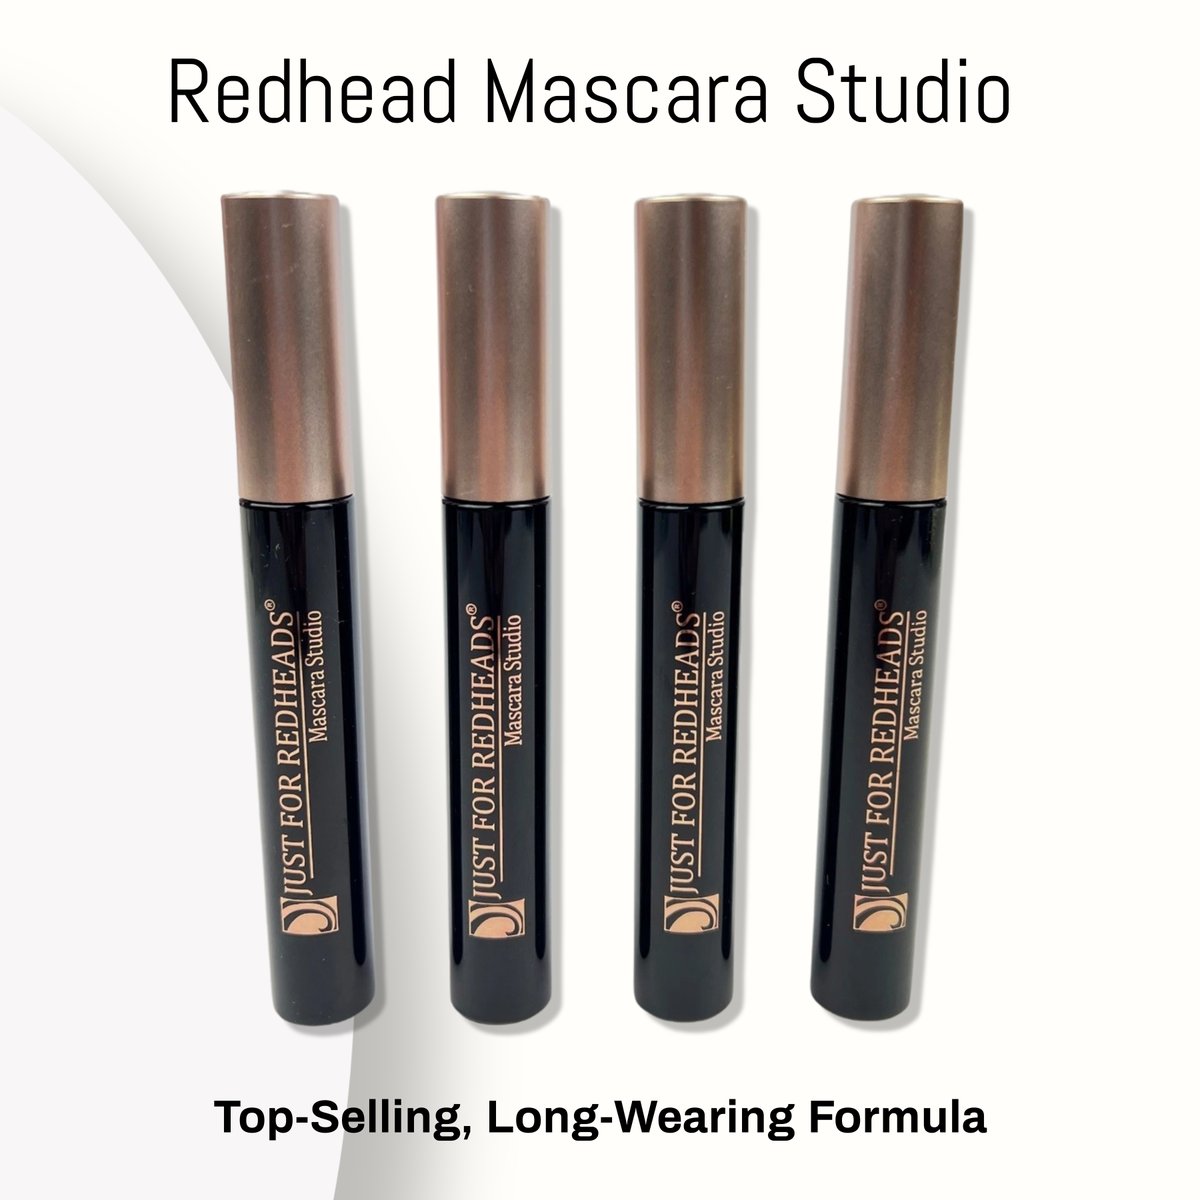 Lengthen and define with our long-wearing formula, enriched with panthenol and vitamin E for lash love from root to tip.

Get your mascara studio today…..and flaunt those lashes!
justforredheads.com/mascara-studio…

#mascara #redhair #beautyproducts #jfr #justforredheadsofficial #ginger